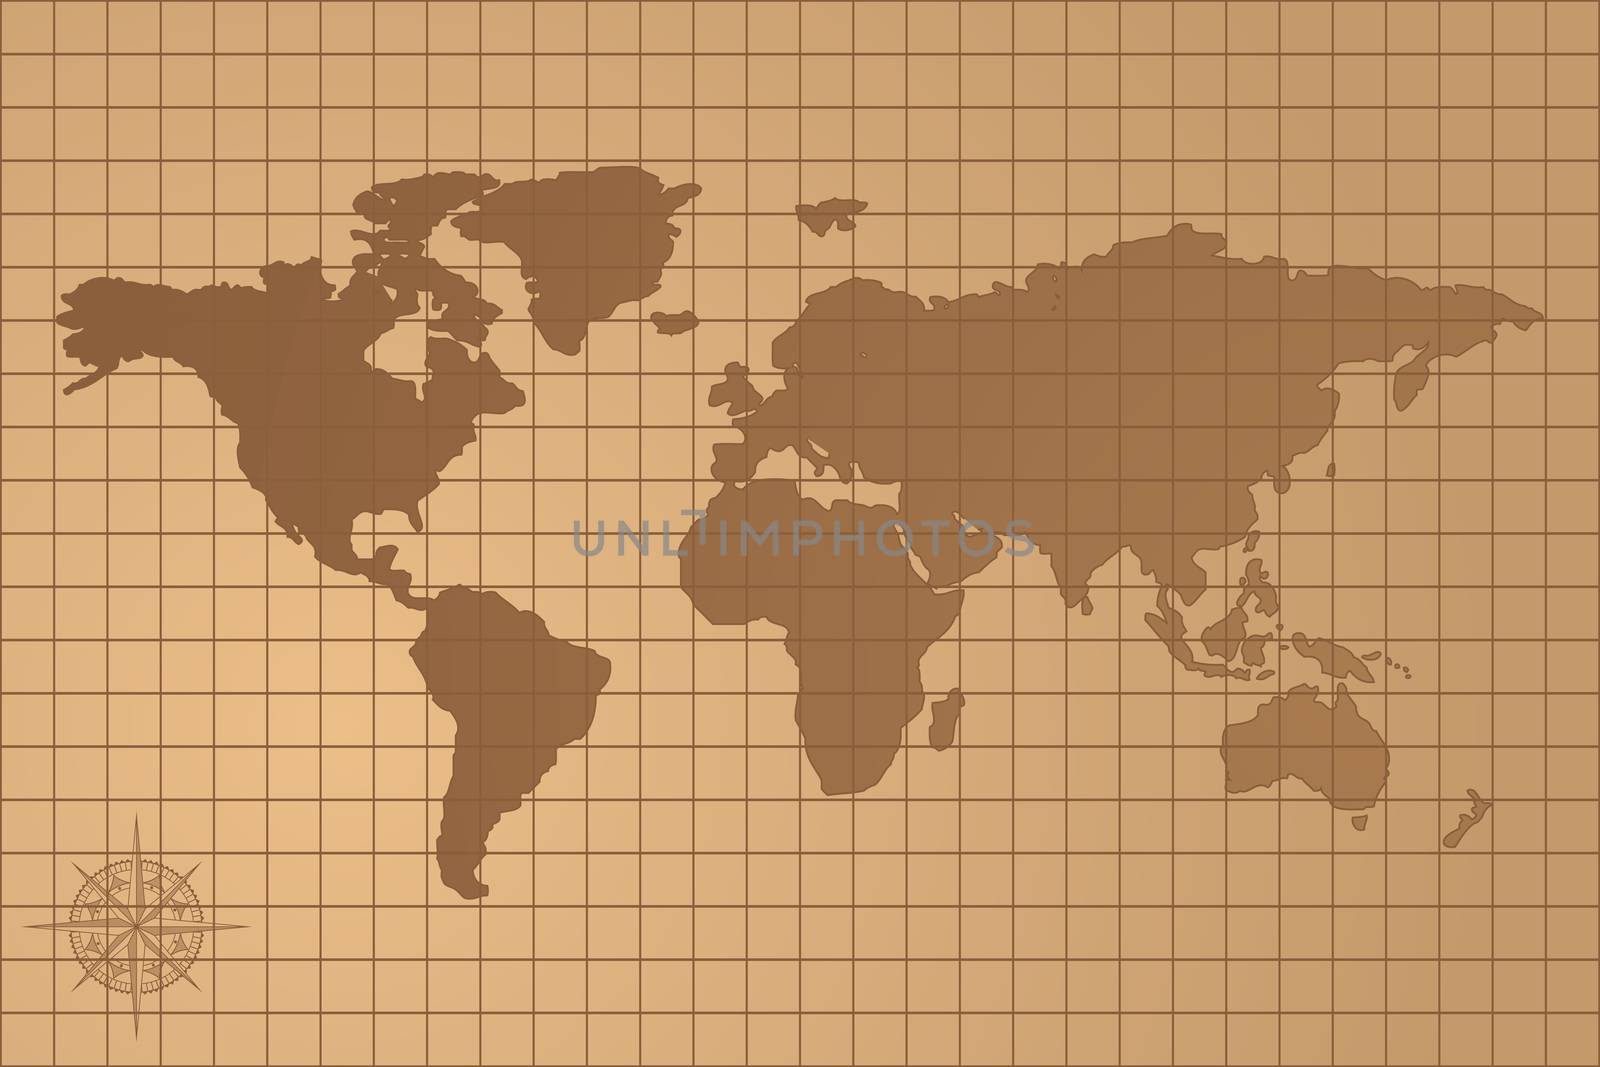 An Illustrated map of the world with all continents